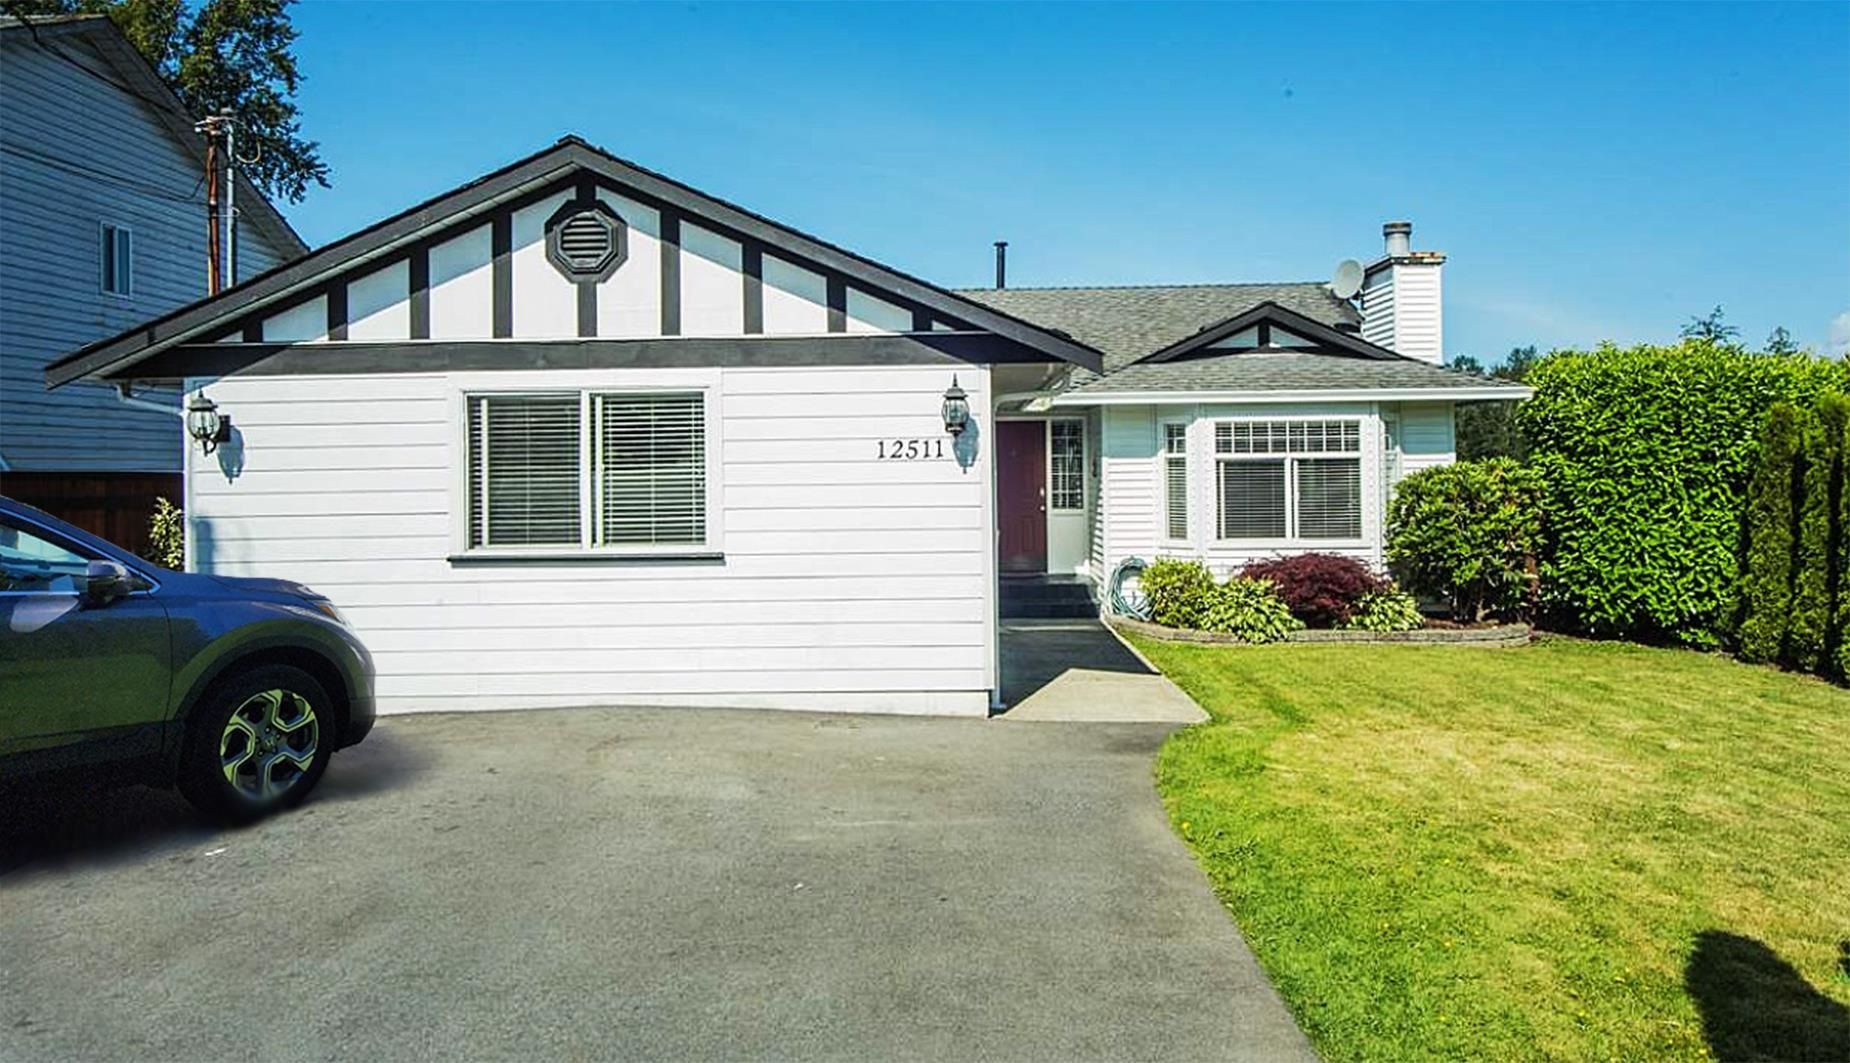 Open House. Open House on Sunday, May 21, 2023 2:00PM - 4:00PM
Open House 2-4 pm! Sat & Sun (20th, 21st)